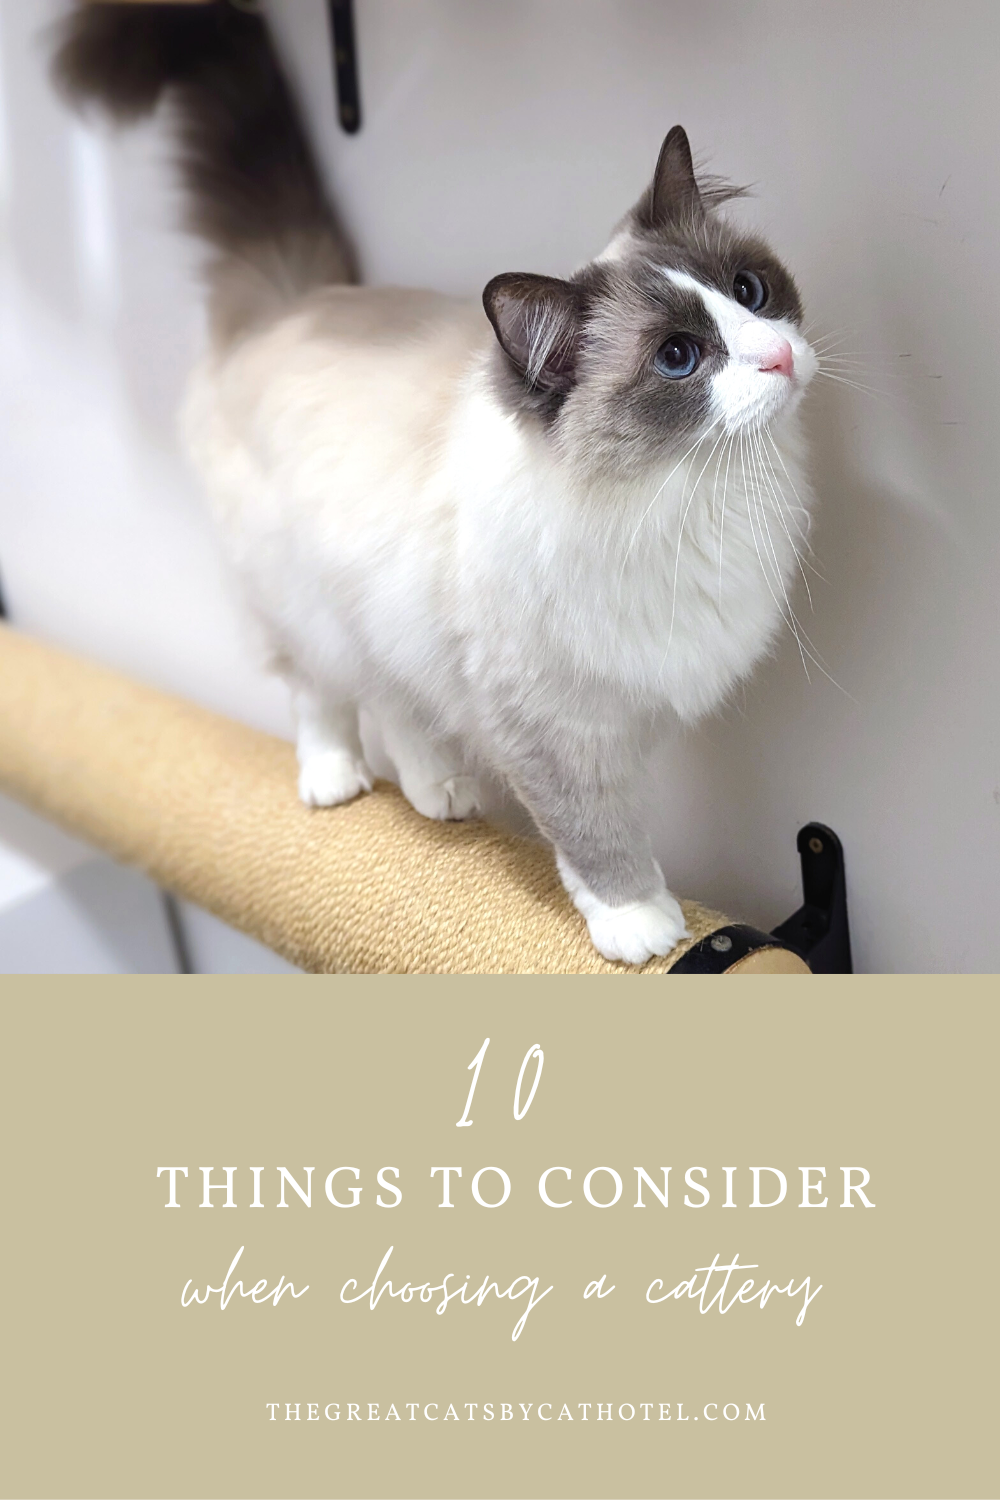 Ragdoll cat with text that reads 10 things to consider when choosing a cattery